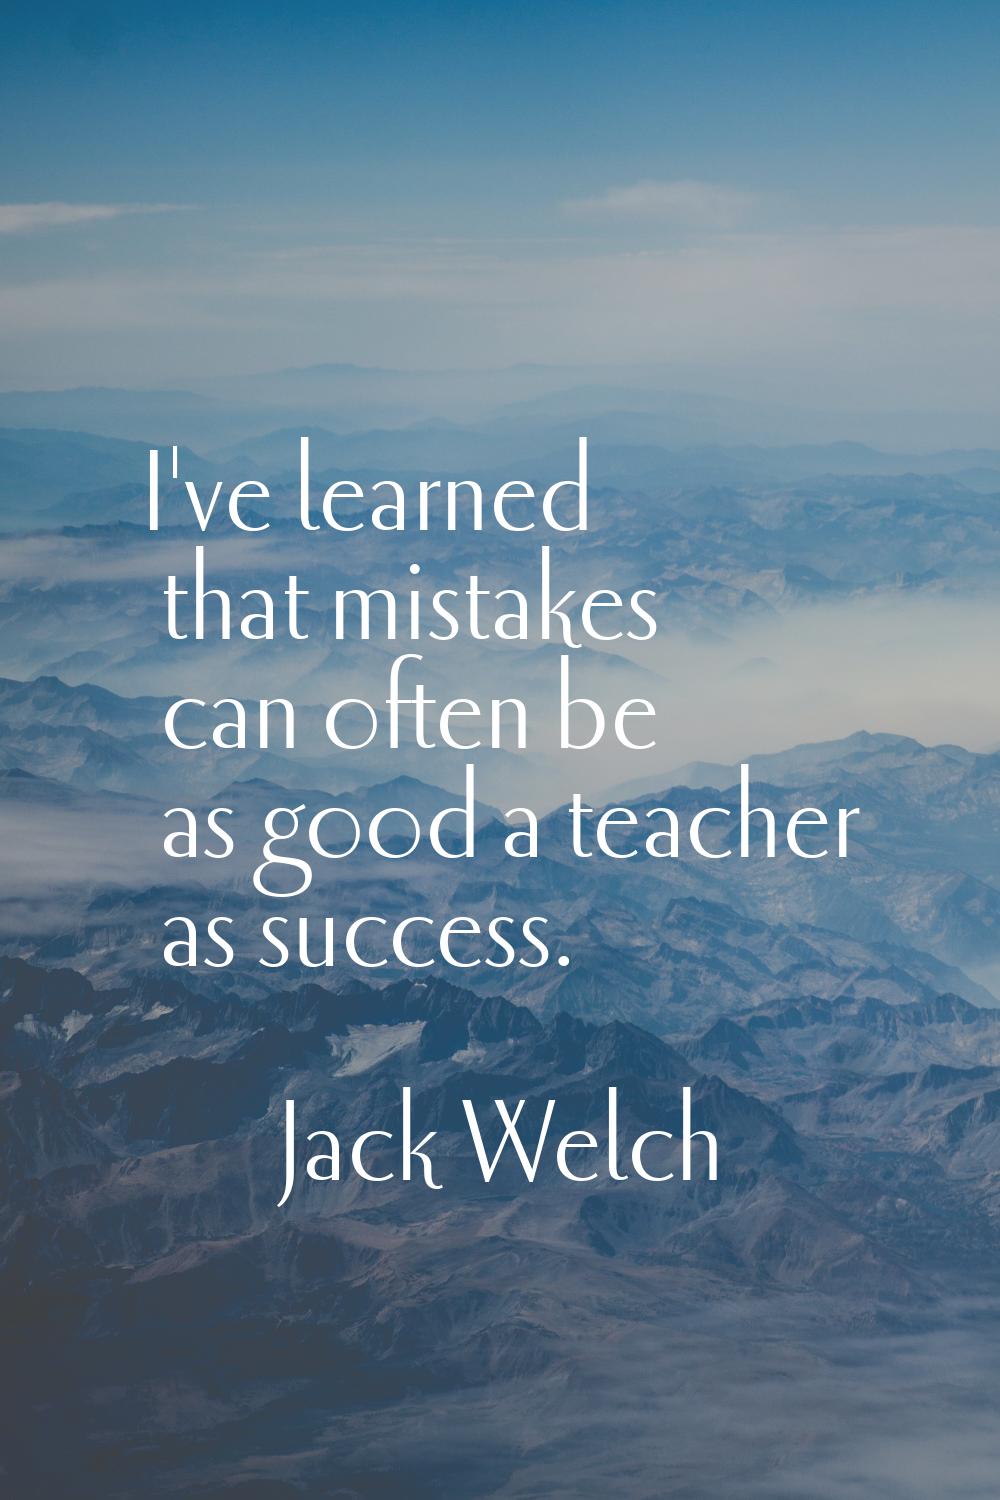 I've learned that mistakes can often be as good a teacher as success.